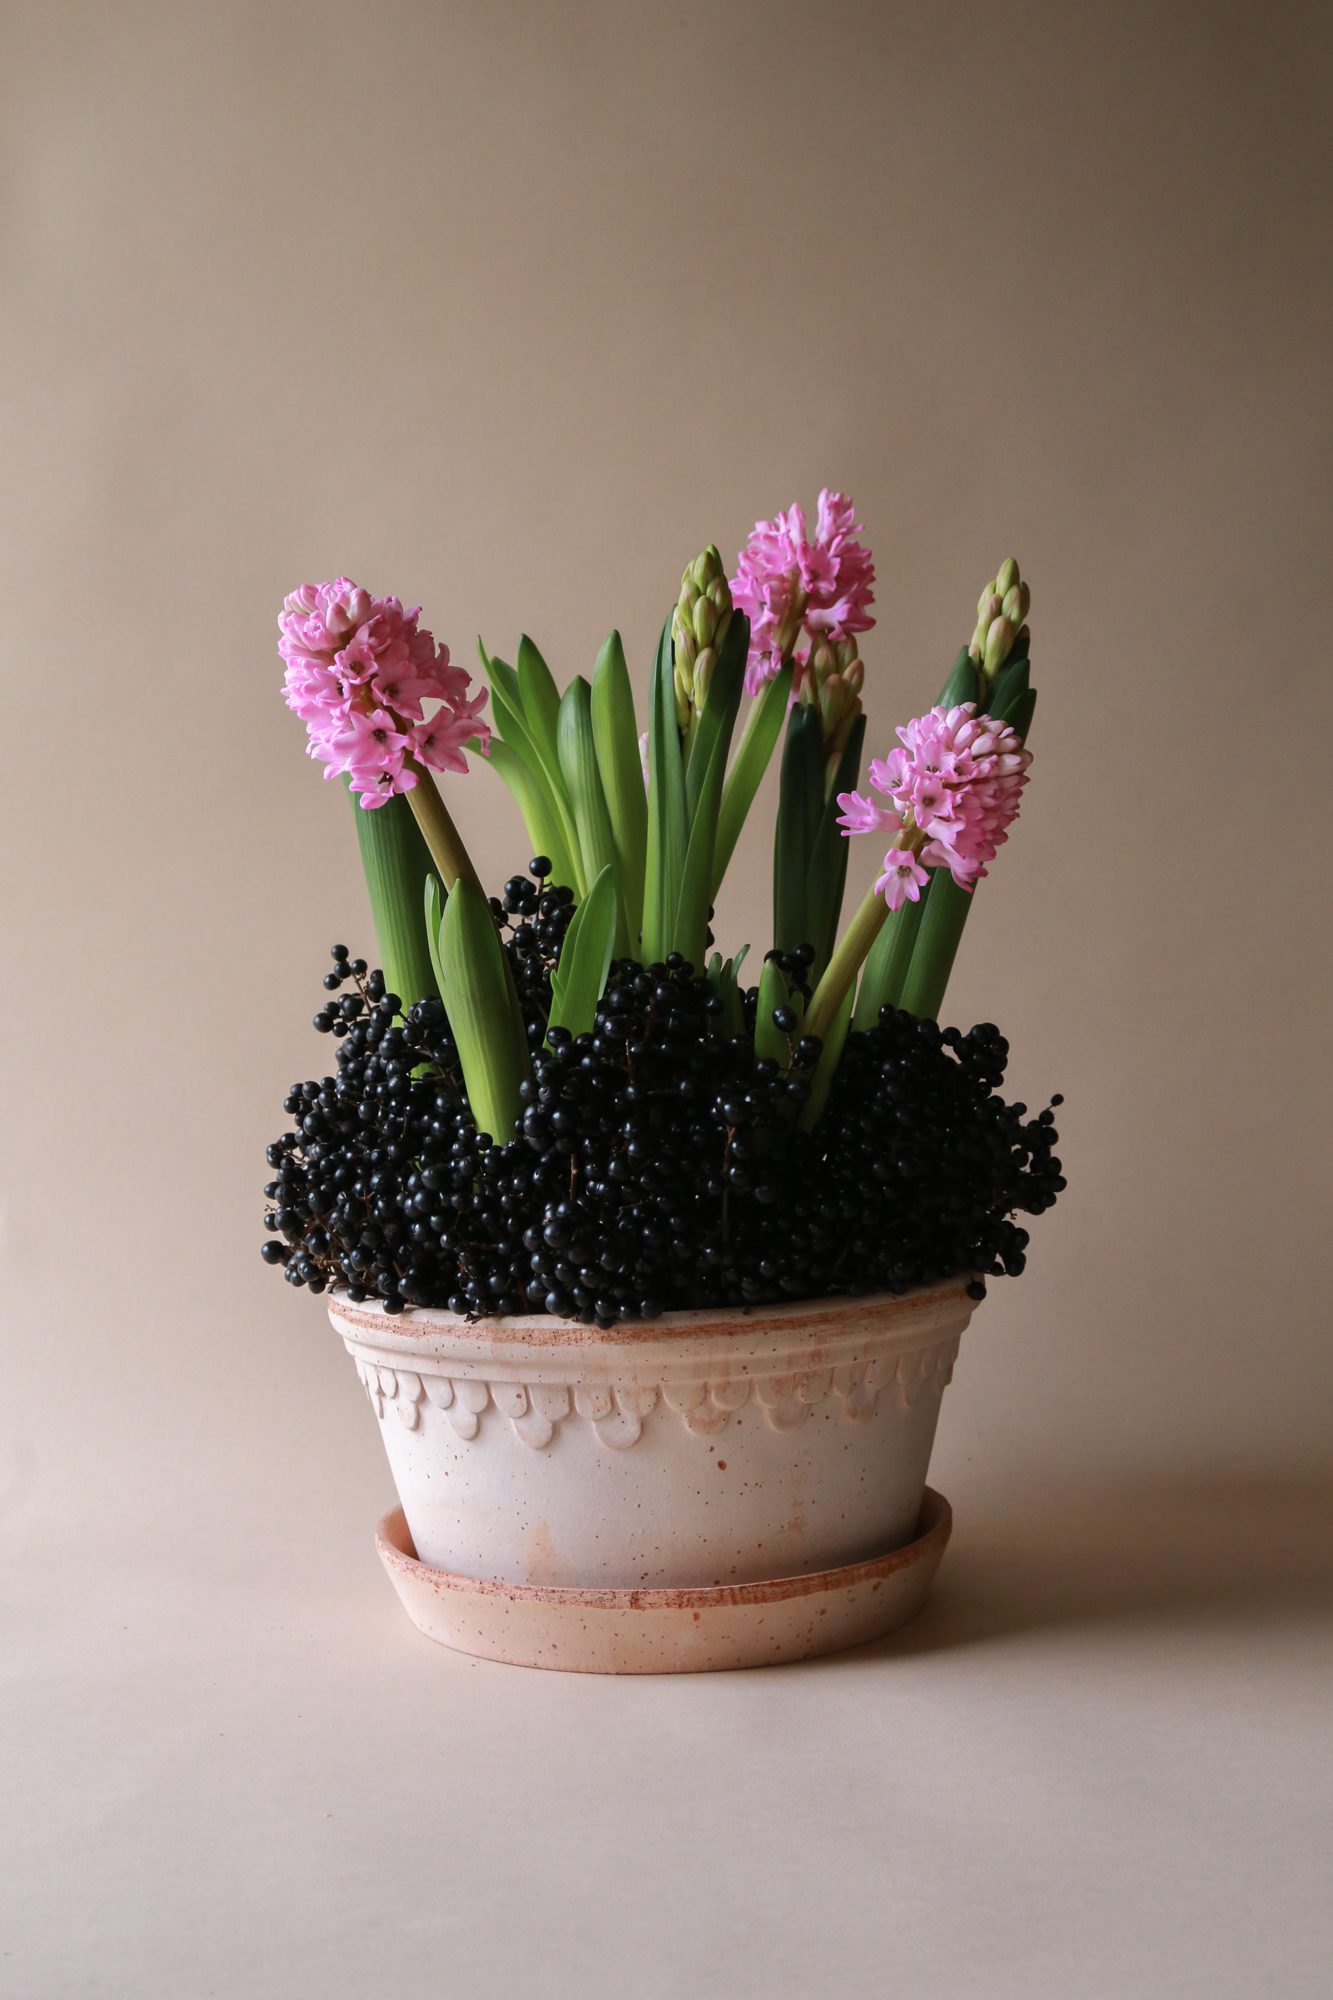 Low pot – elegantly decorated. The classic castle pot